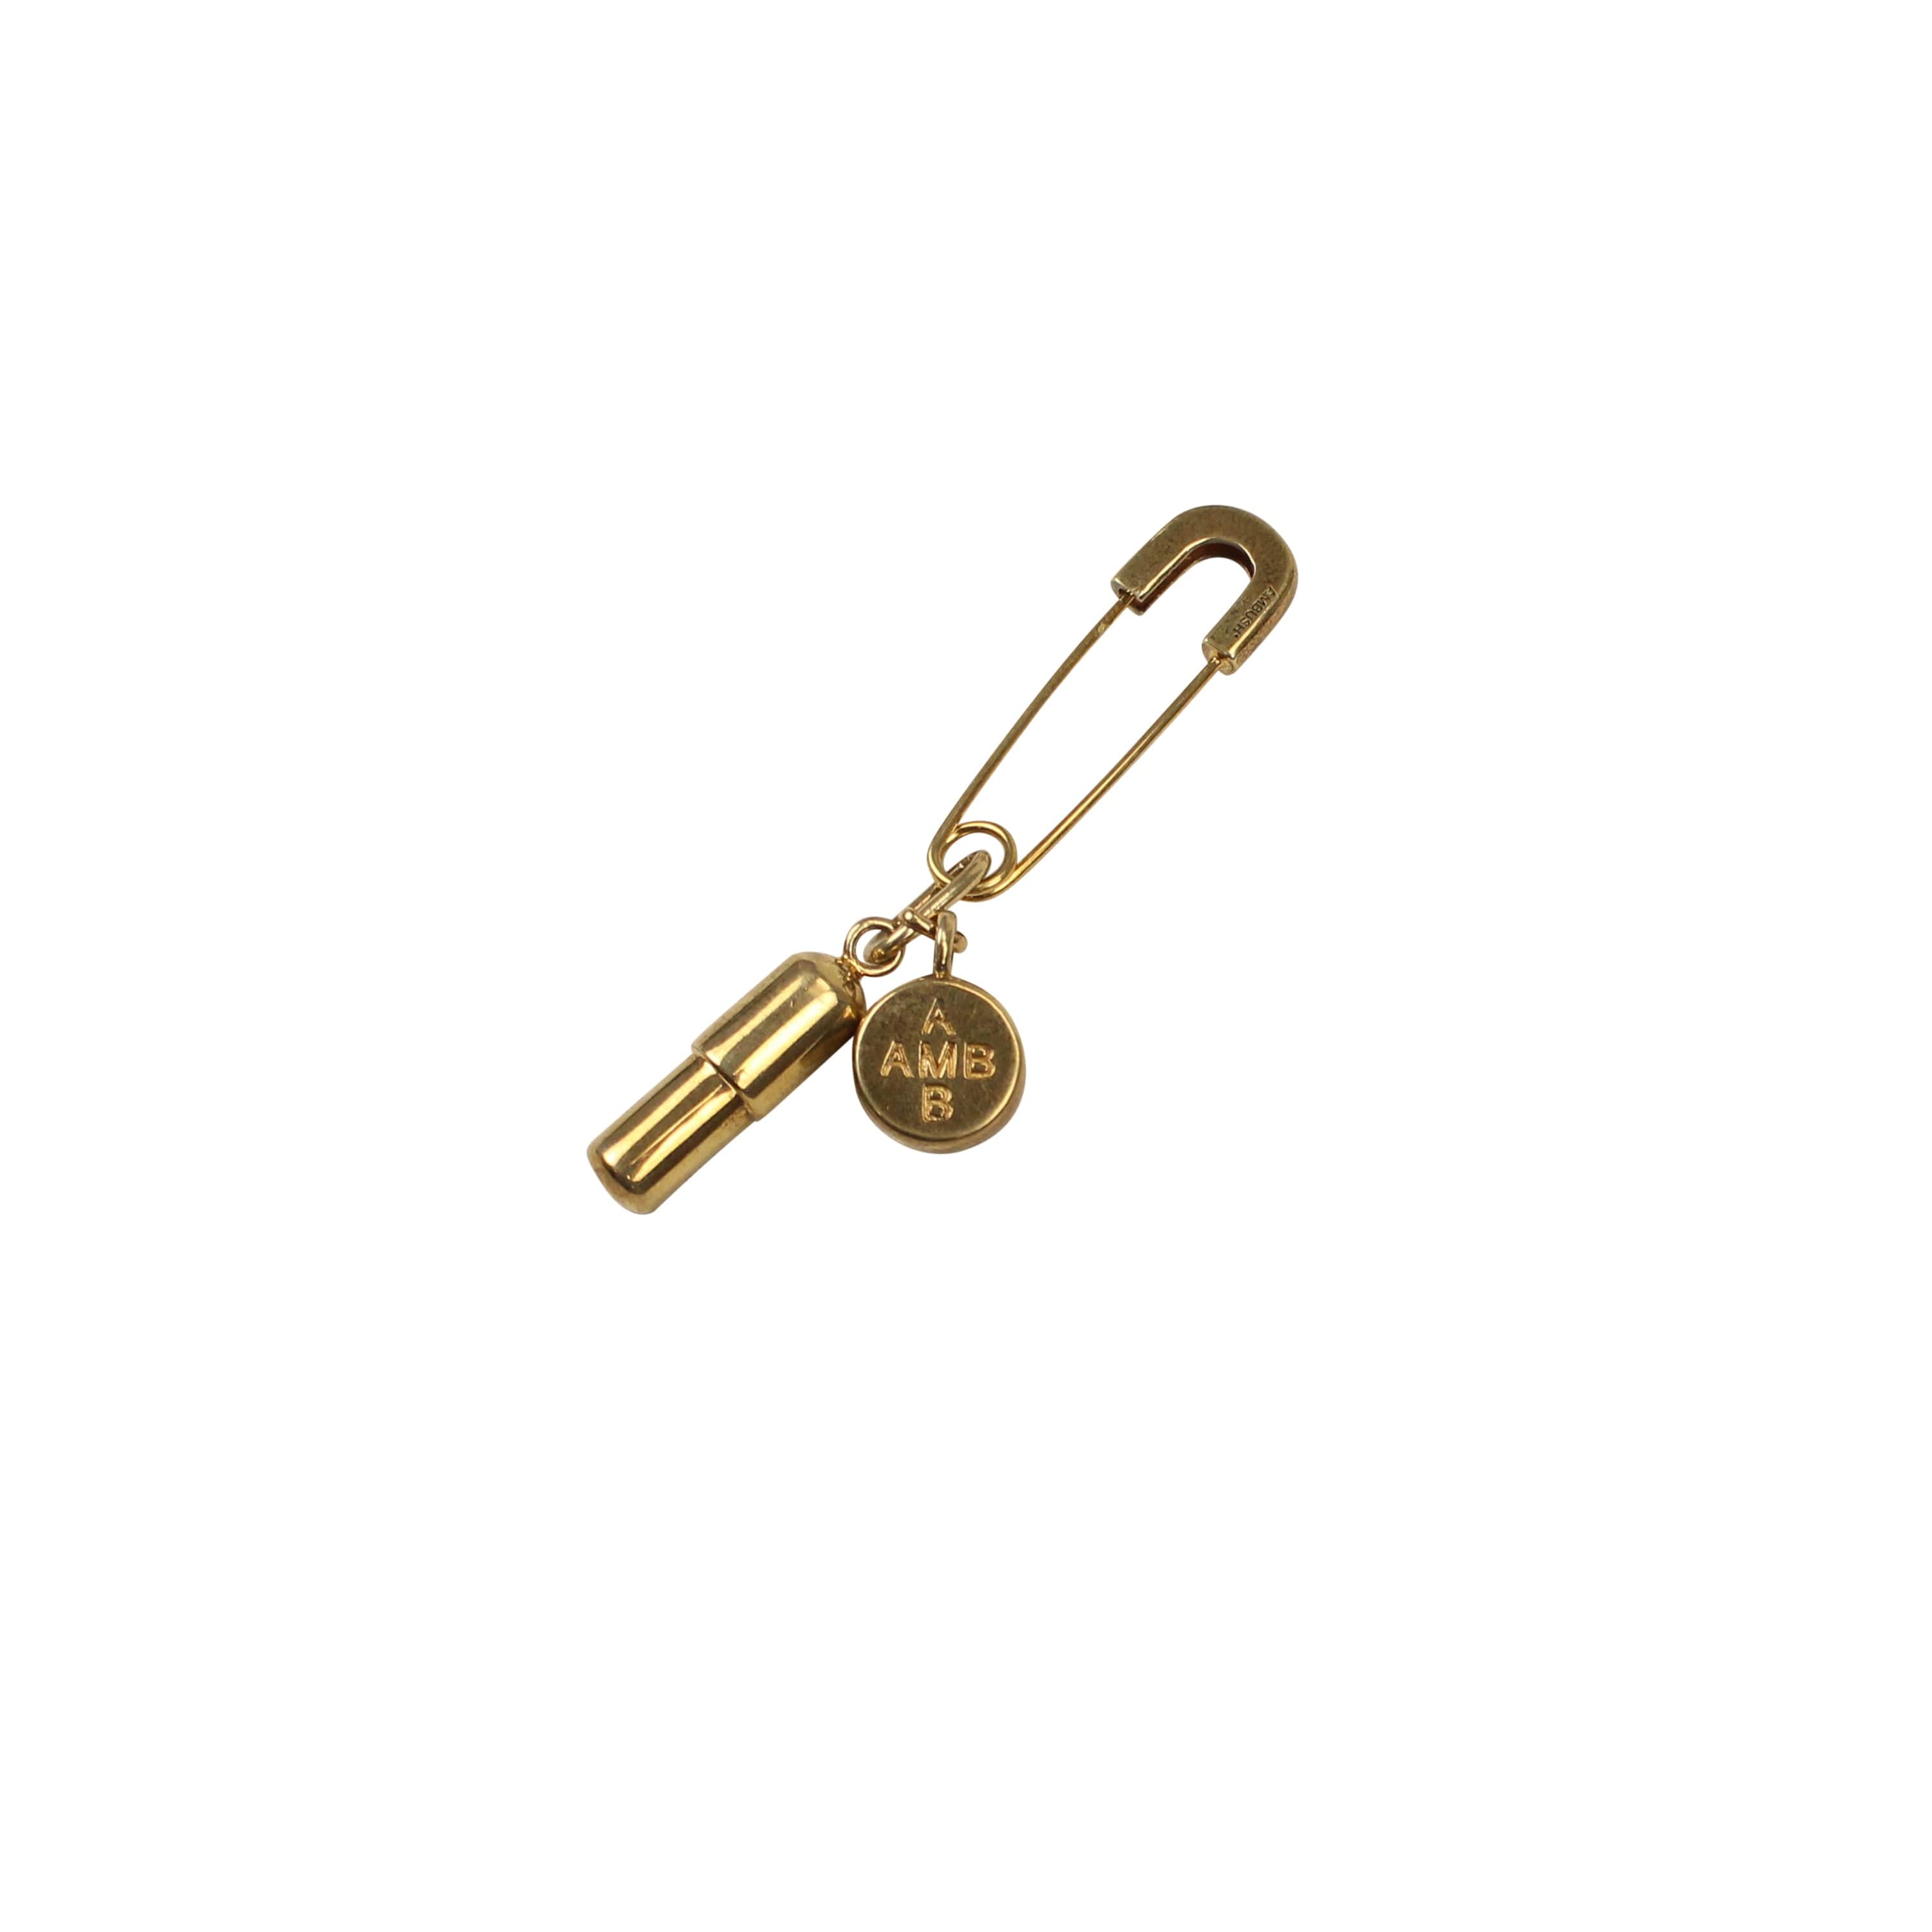 Ambush ambush, channelenable-all, chicmi, couponcollection, main-accessories, shop375, Stadium Goods, under-250, unisex-jewelry OS Gold Pill Charm Earring 95-AMB-3050/OS 95-AMB-3050/OS